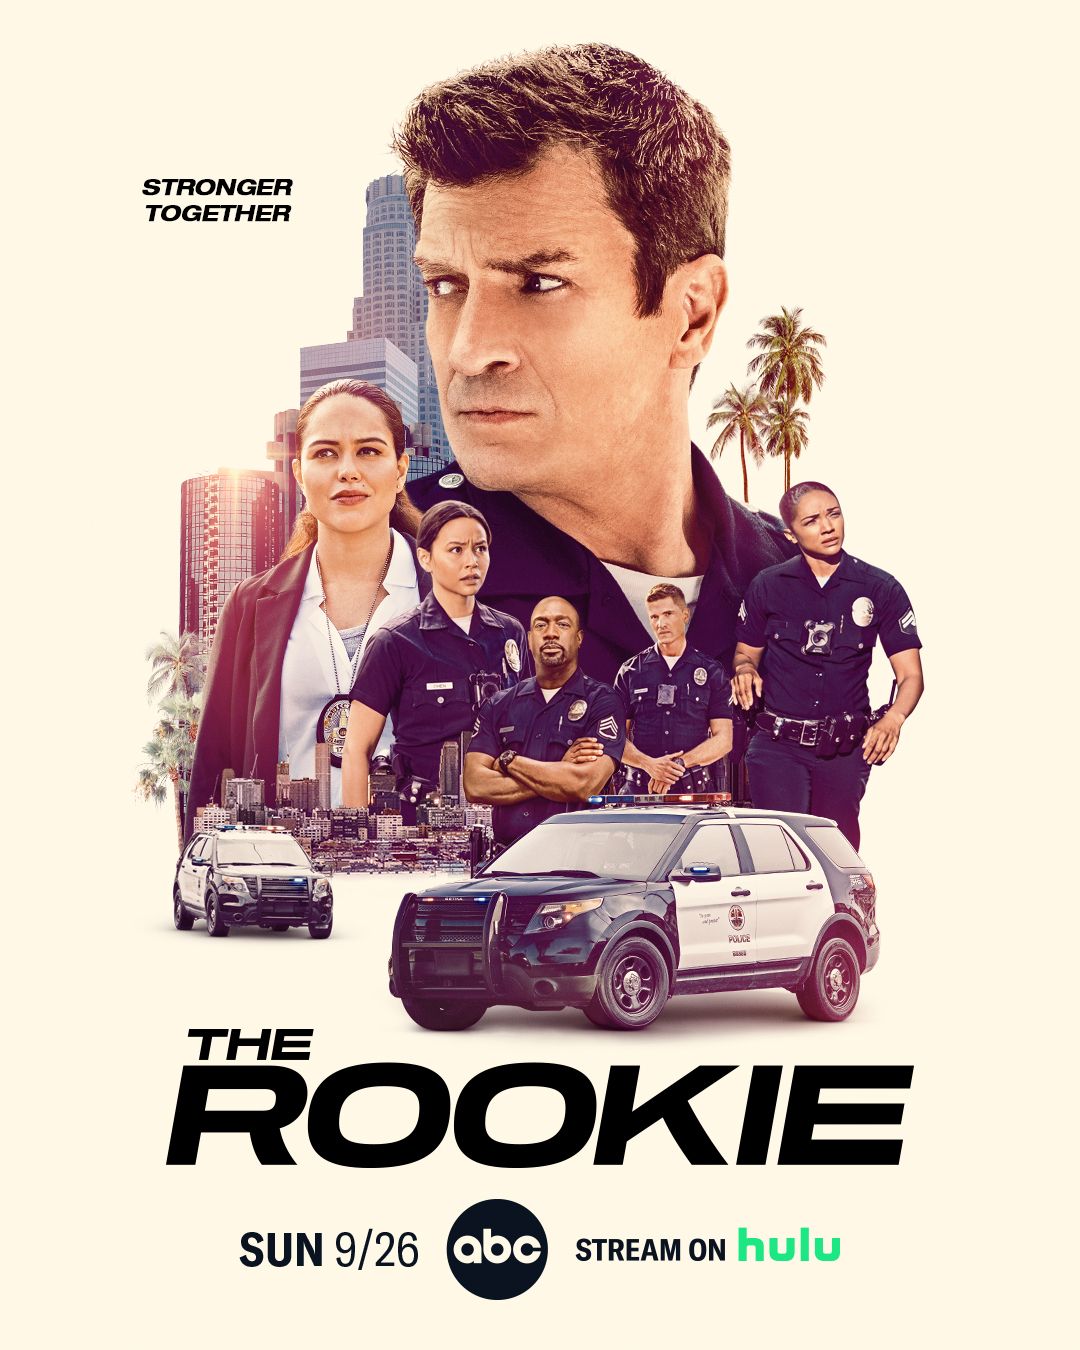 The Rookie cast posing on TV Show Poster